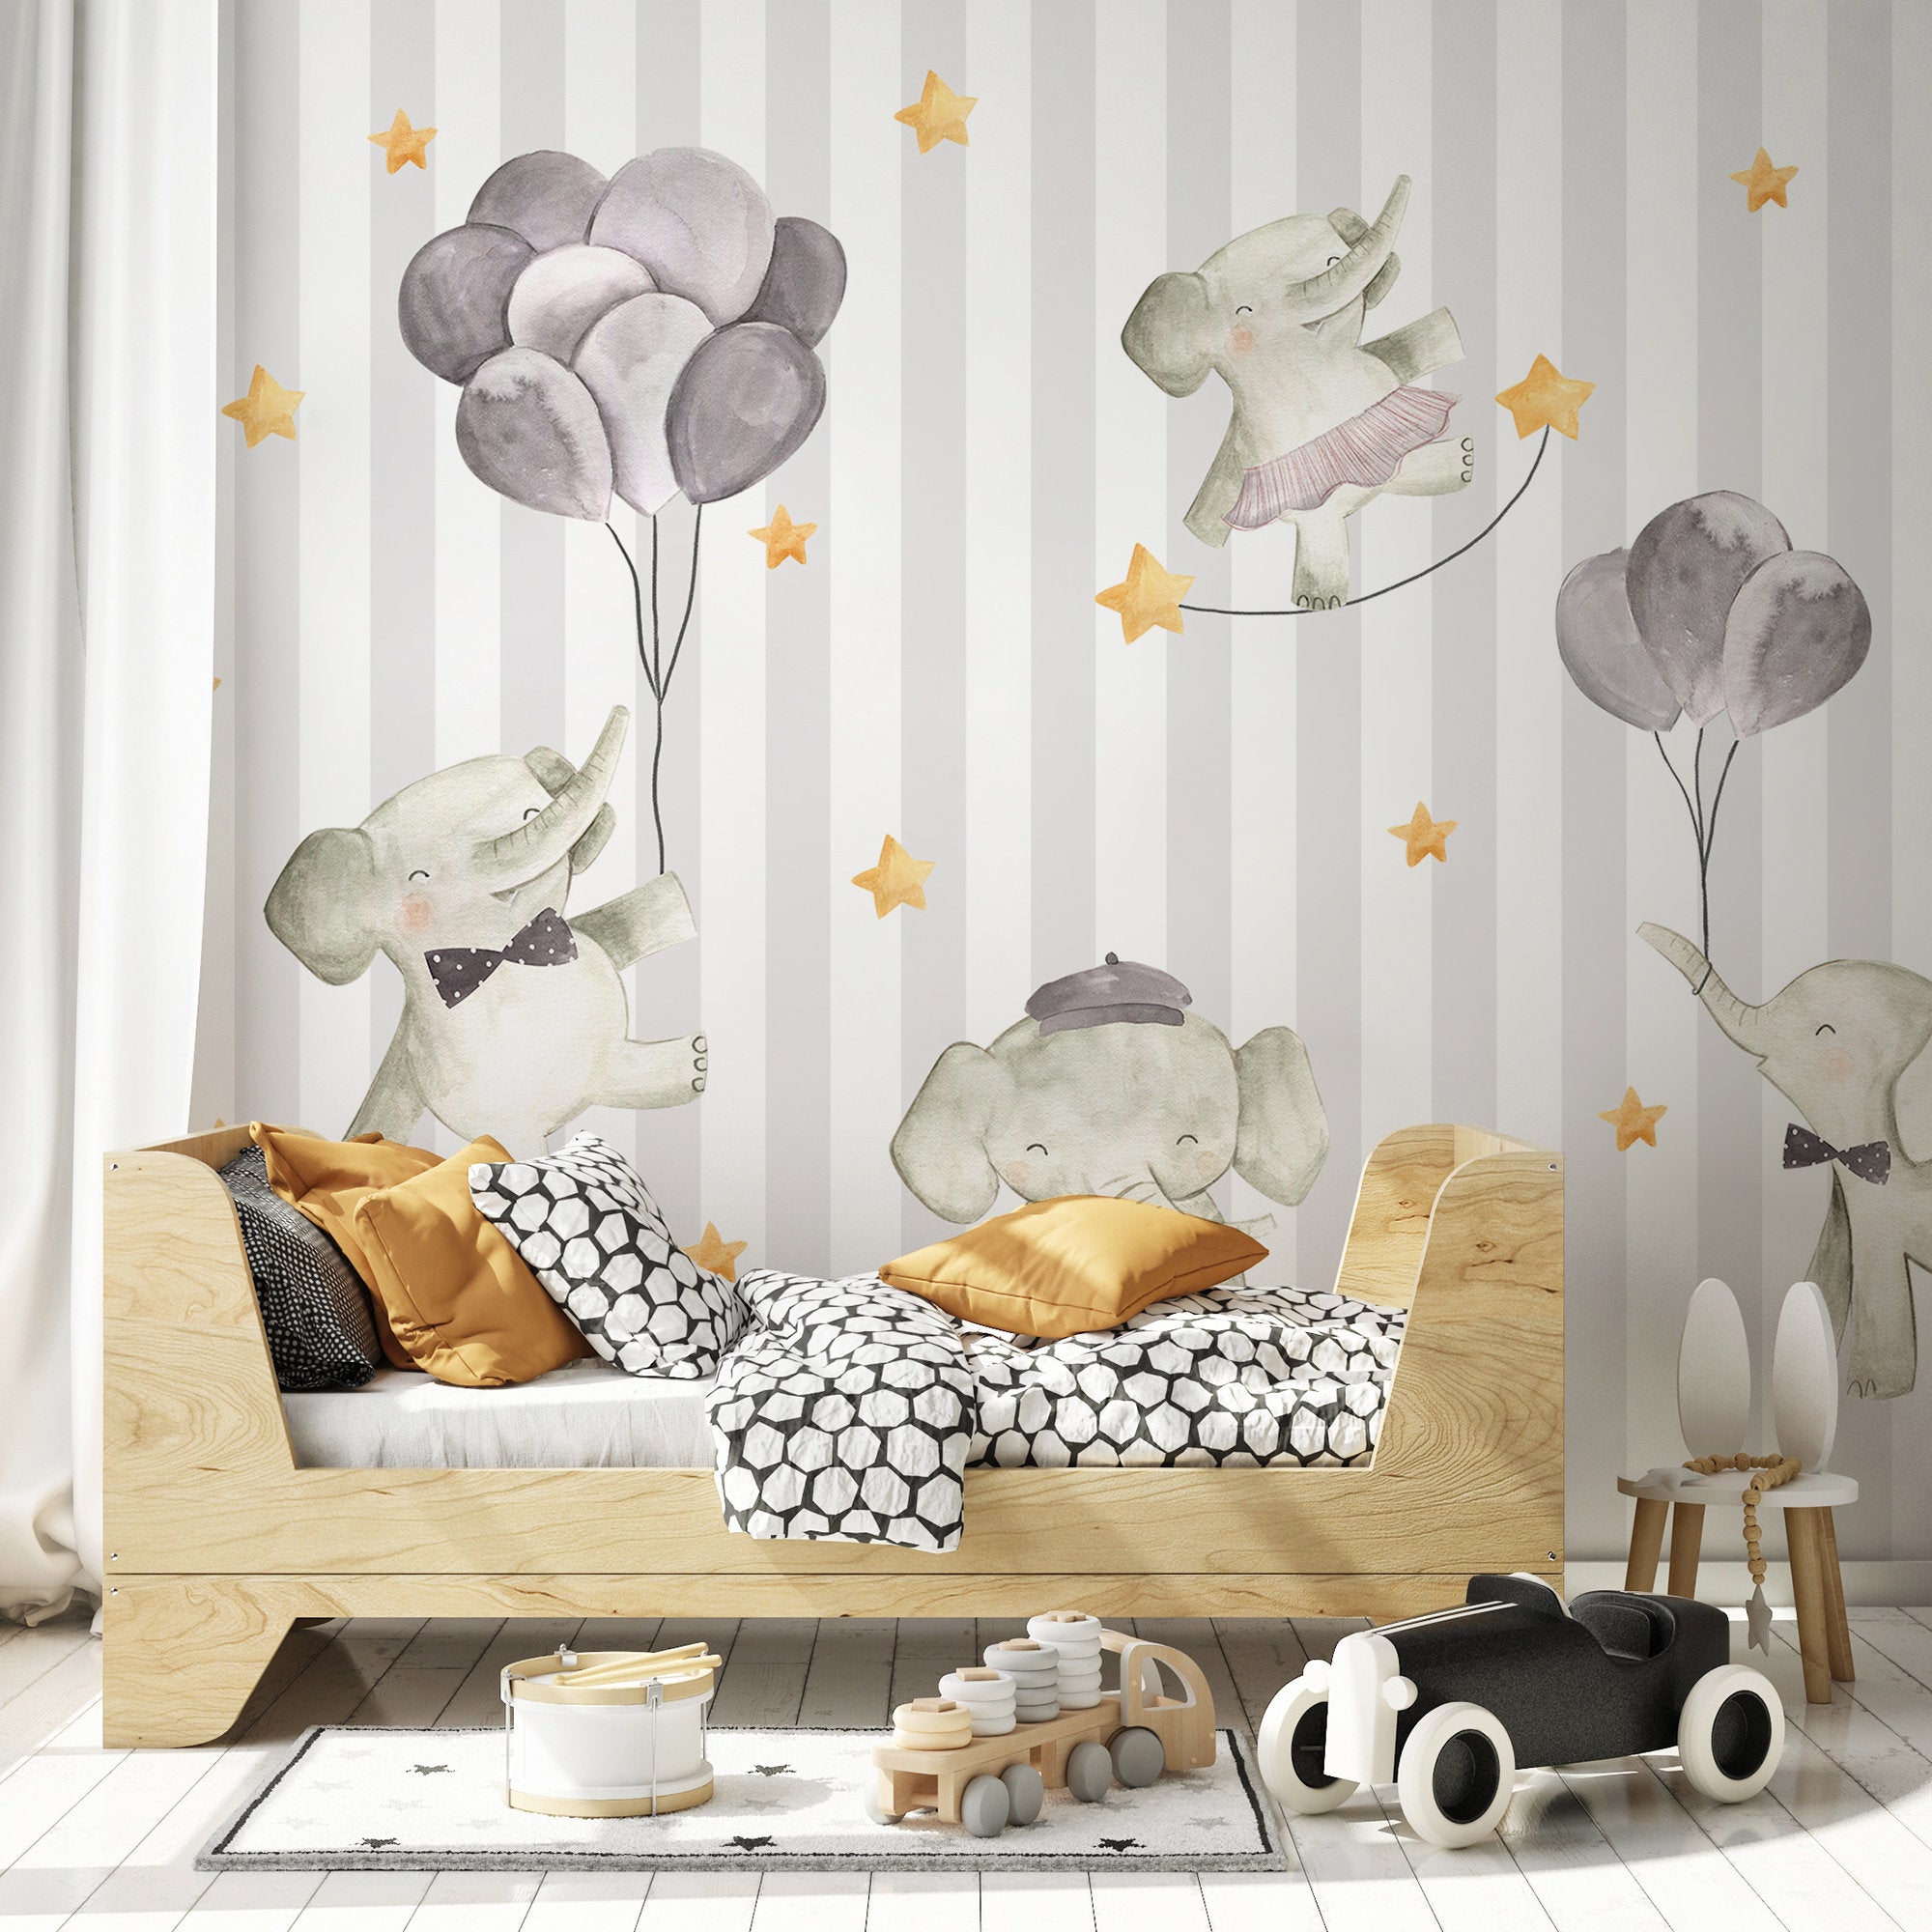 Cheerful Flying Baby Elephants Wallpaper Self Adhesive Peel and Stick Wall Sticker Wall Decoration Minimalistic Scandinavian Removable